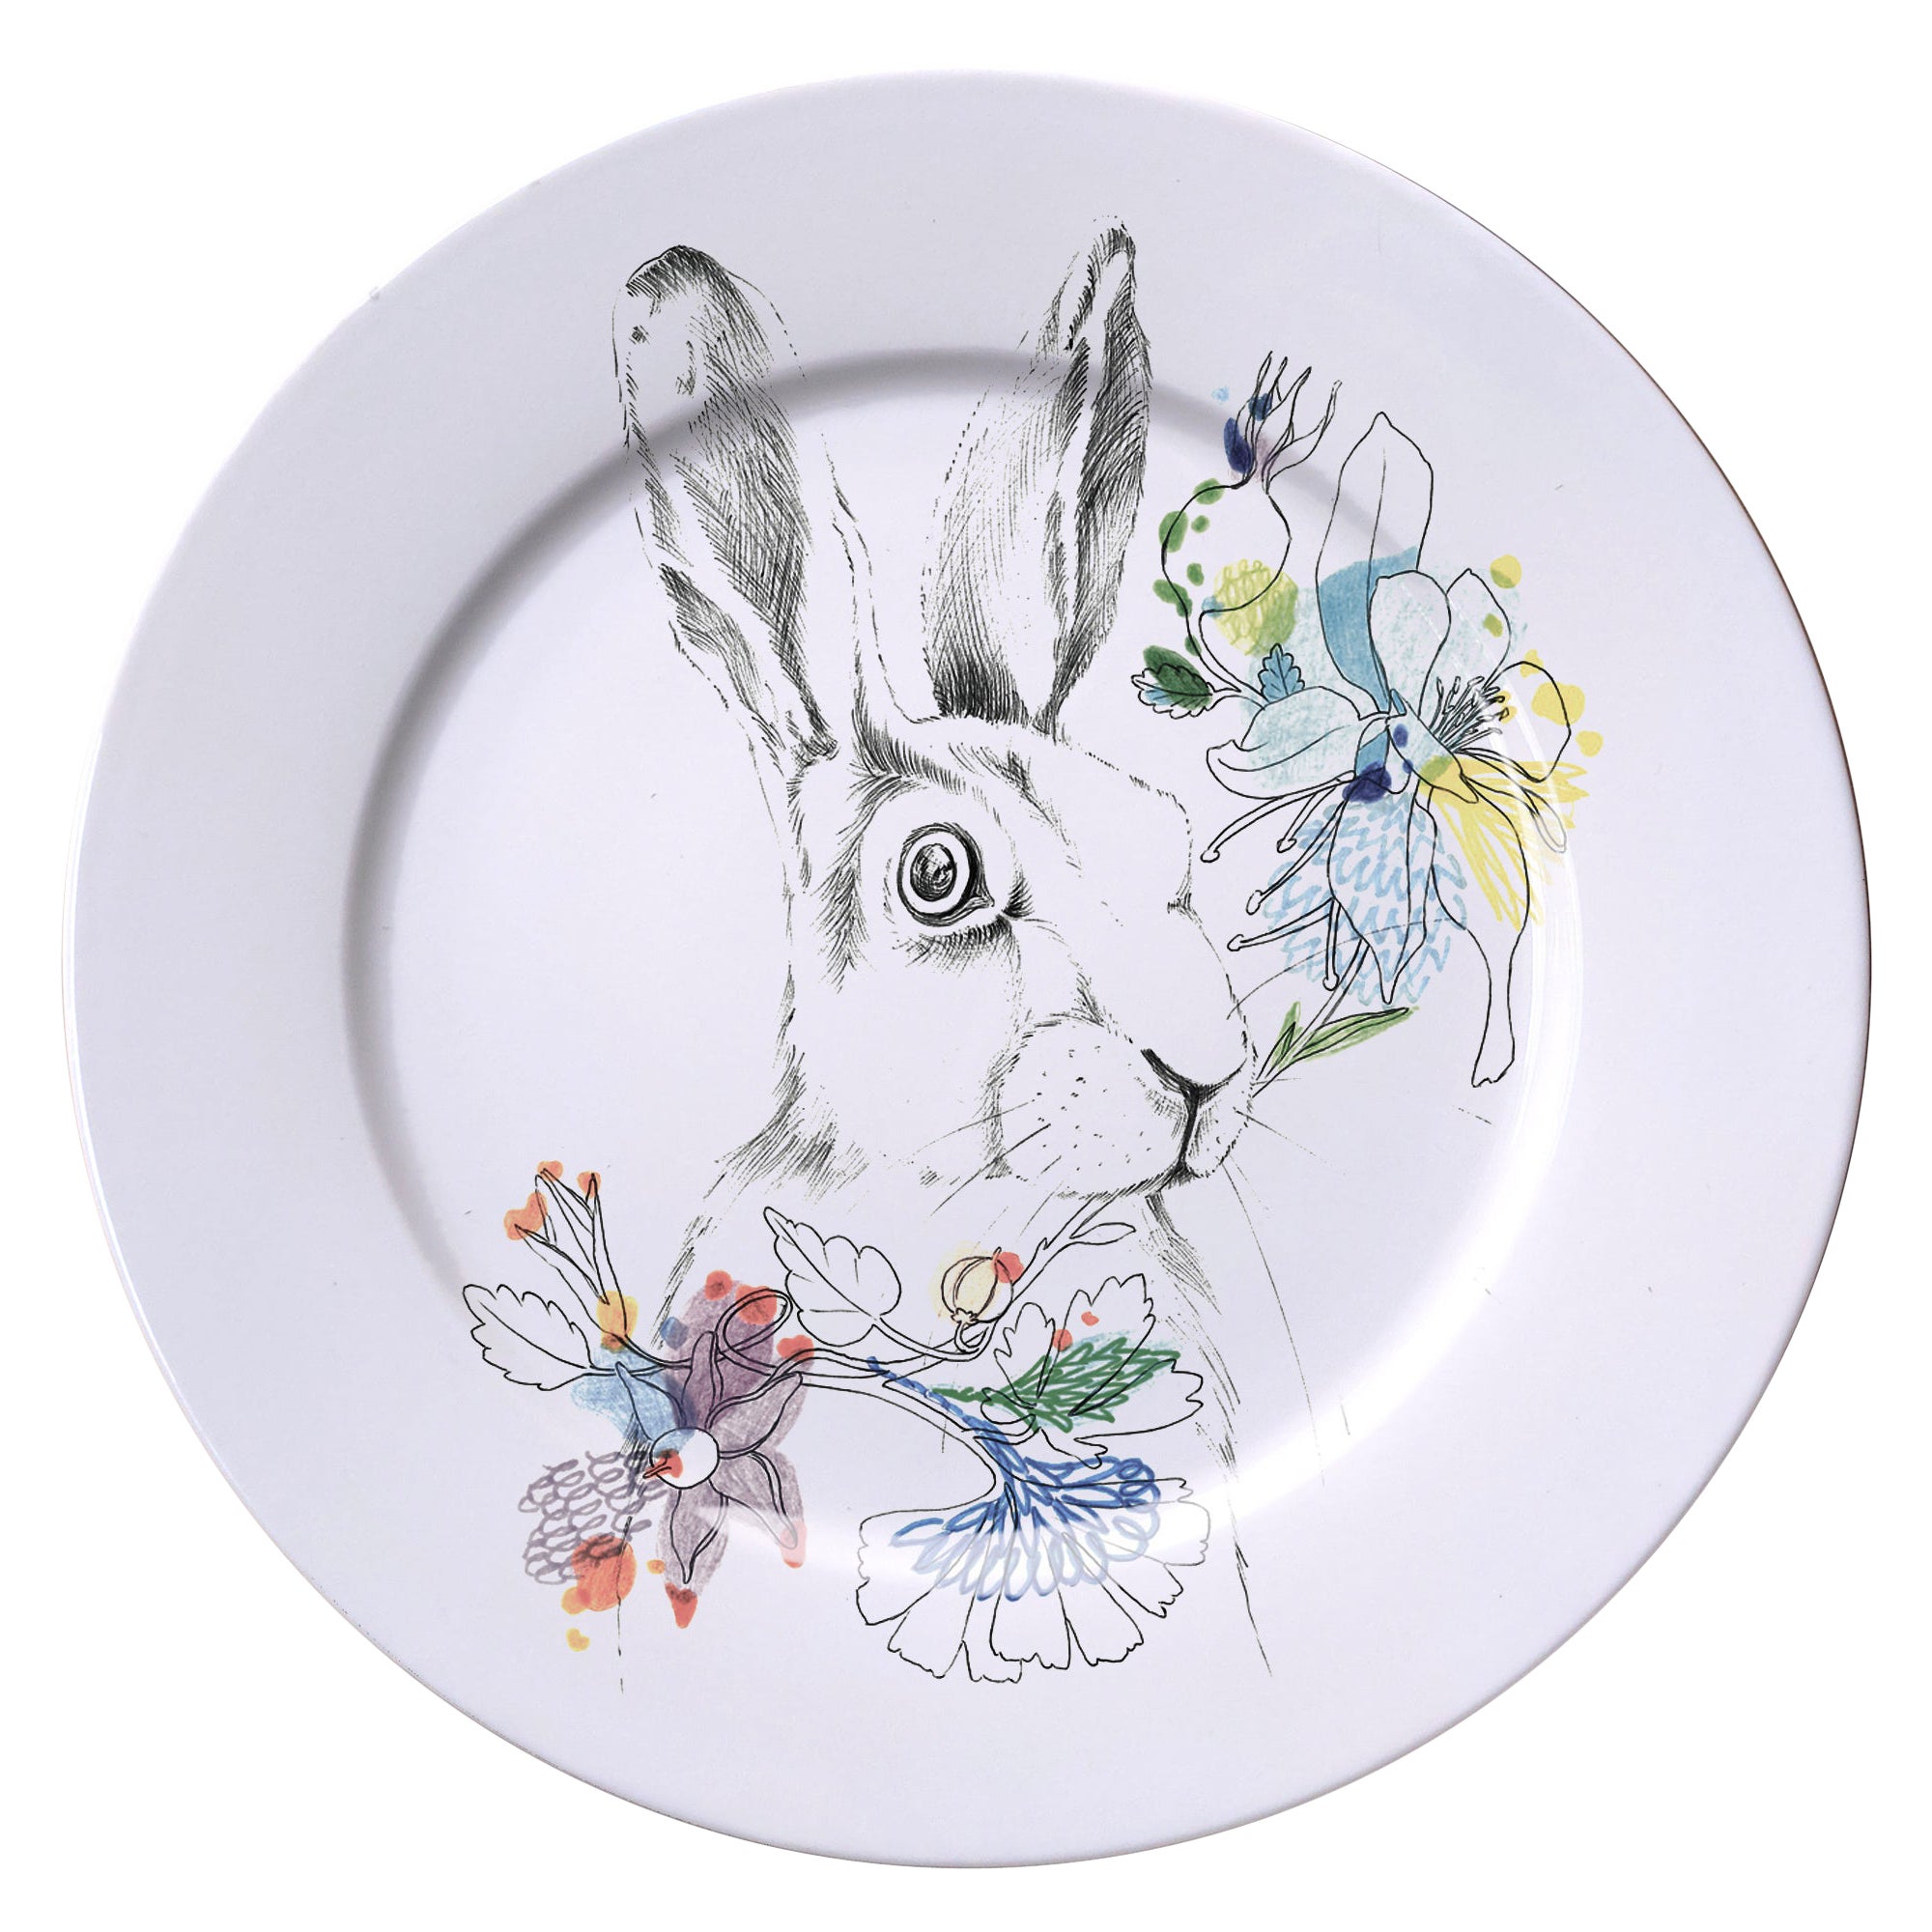 Ode to the Woods, Contemporary Porcelain Dinner Plate with Rabbit and Flowers For Sale